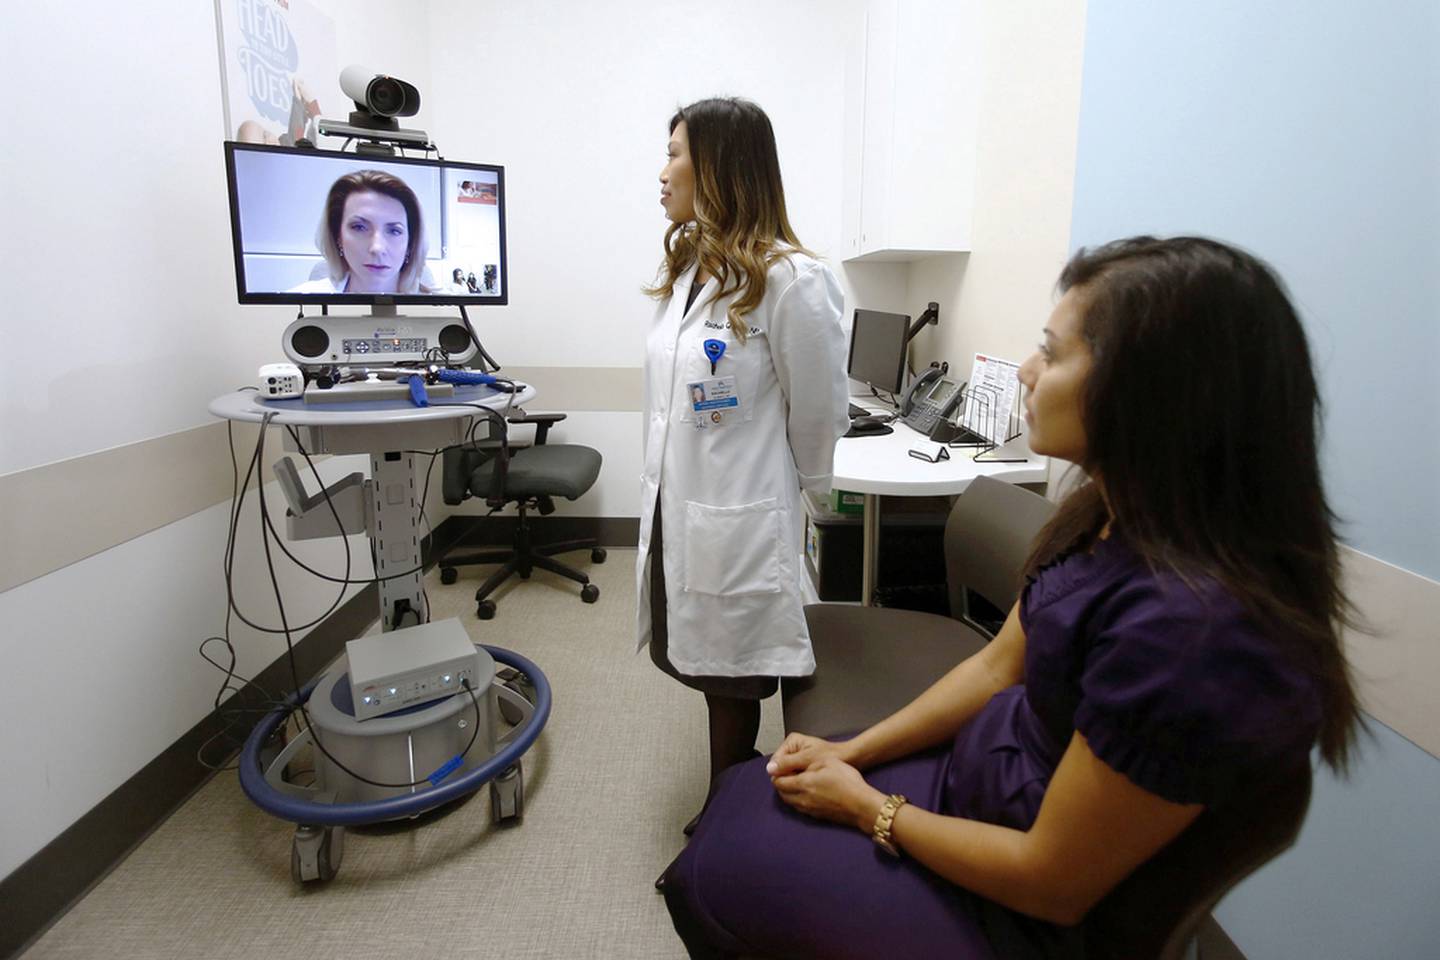 Demand for digital healthcare services has grown amid the coronavirus pandemic. Reuters